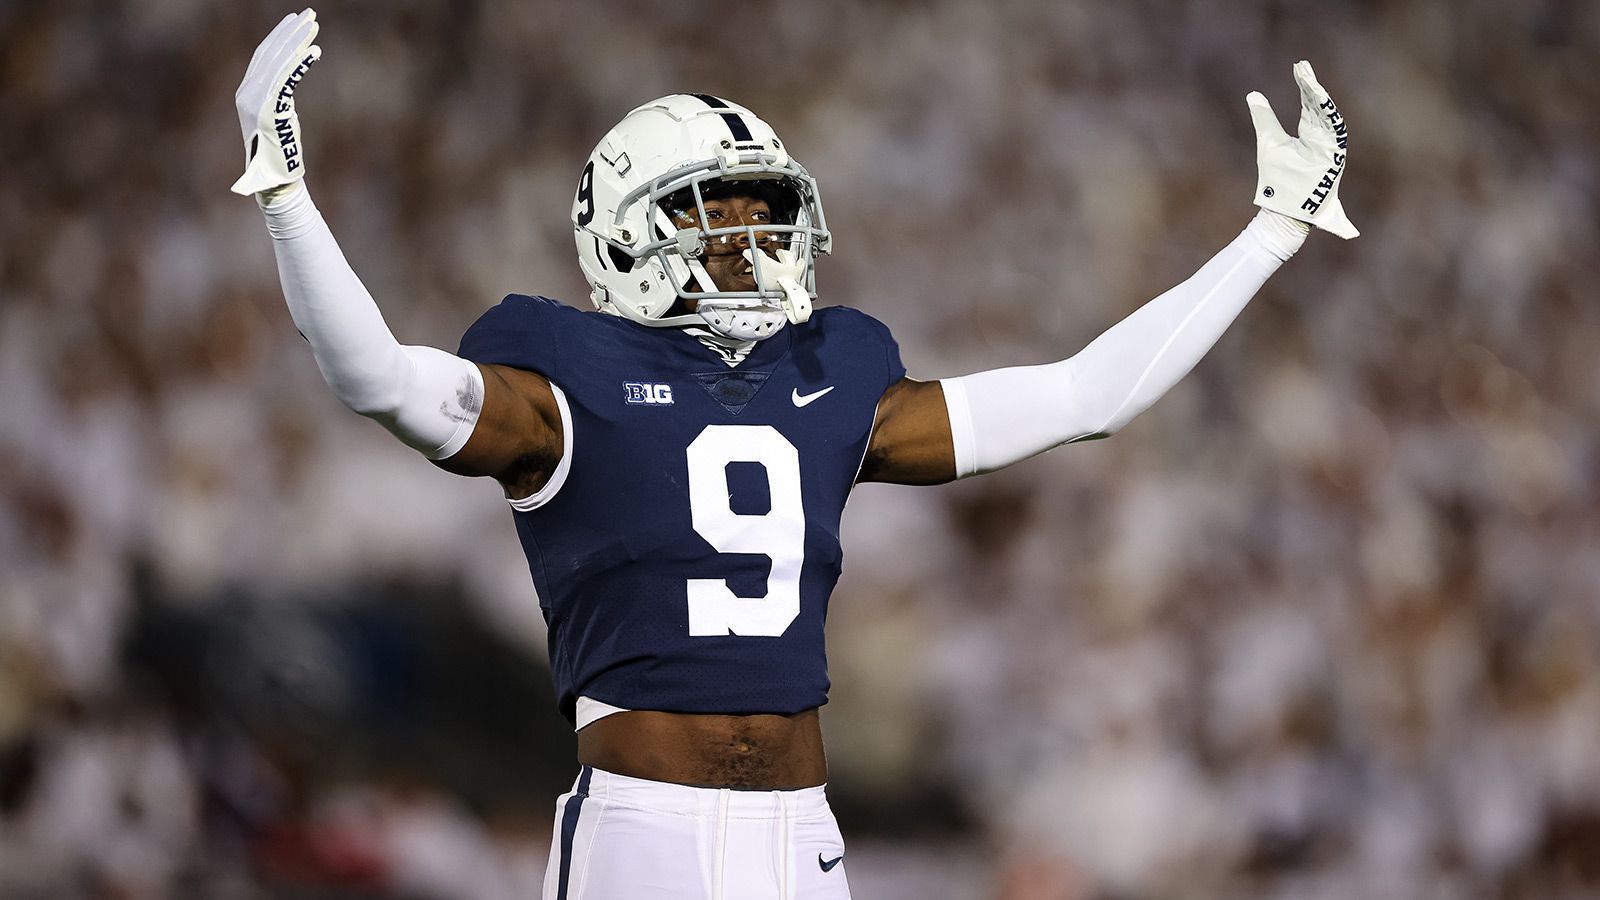 
                <strong>Joey Porter Jr.</strong><br>
                &#x2022; Position: Cornerback<br>&#x2022; College: Pennsylvania State University<br>
              